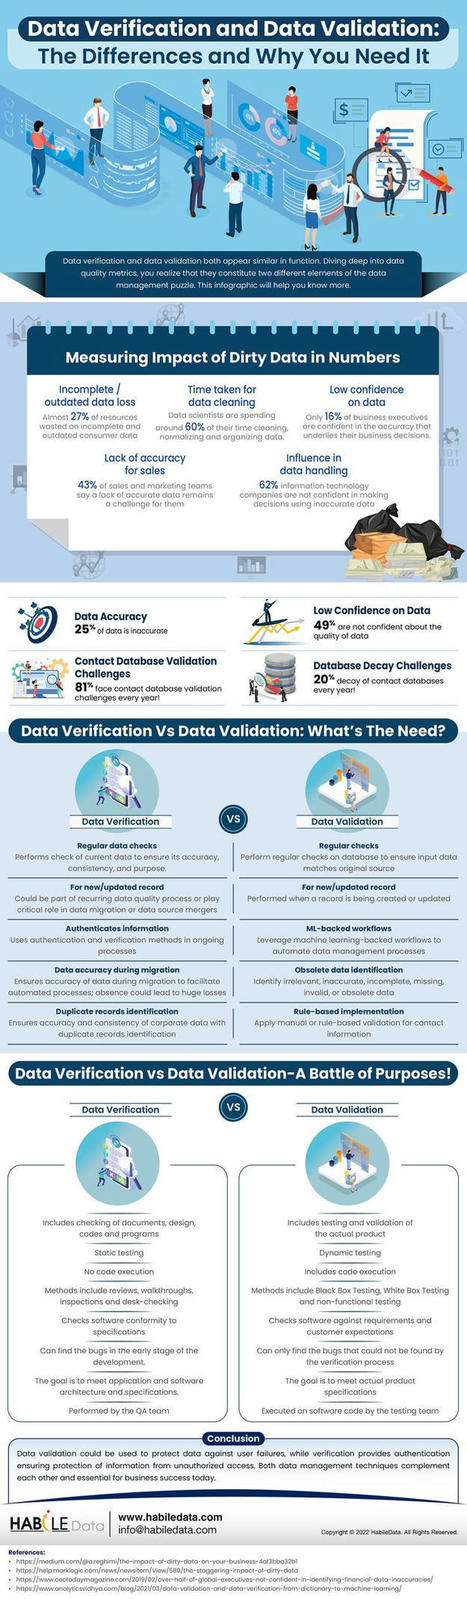 Data Verification and Data Validation: The Differences and Why You Need It | Data Management Solutions | Scoop.it